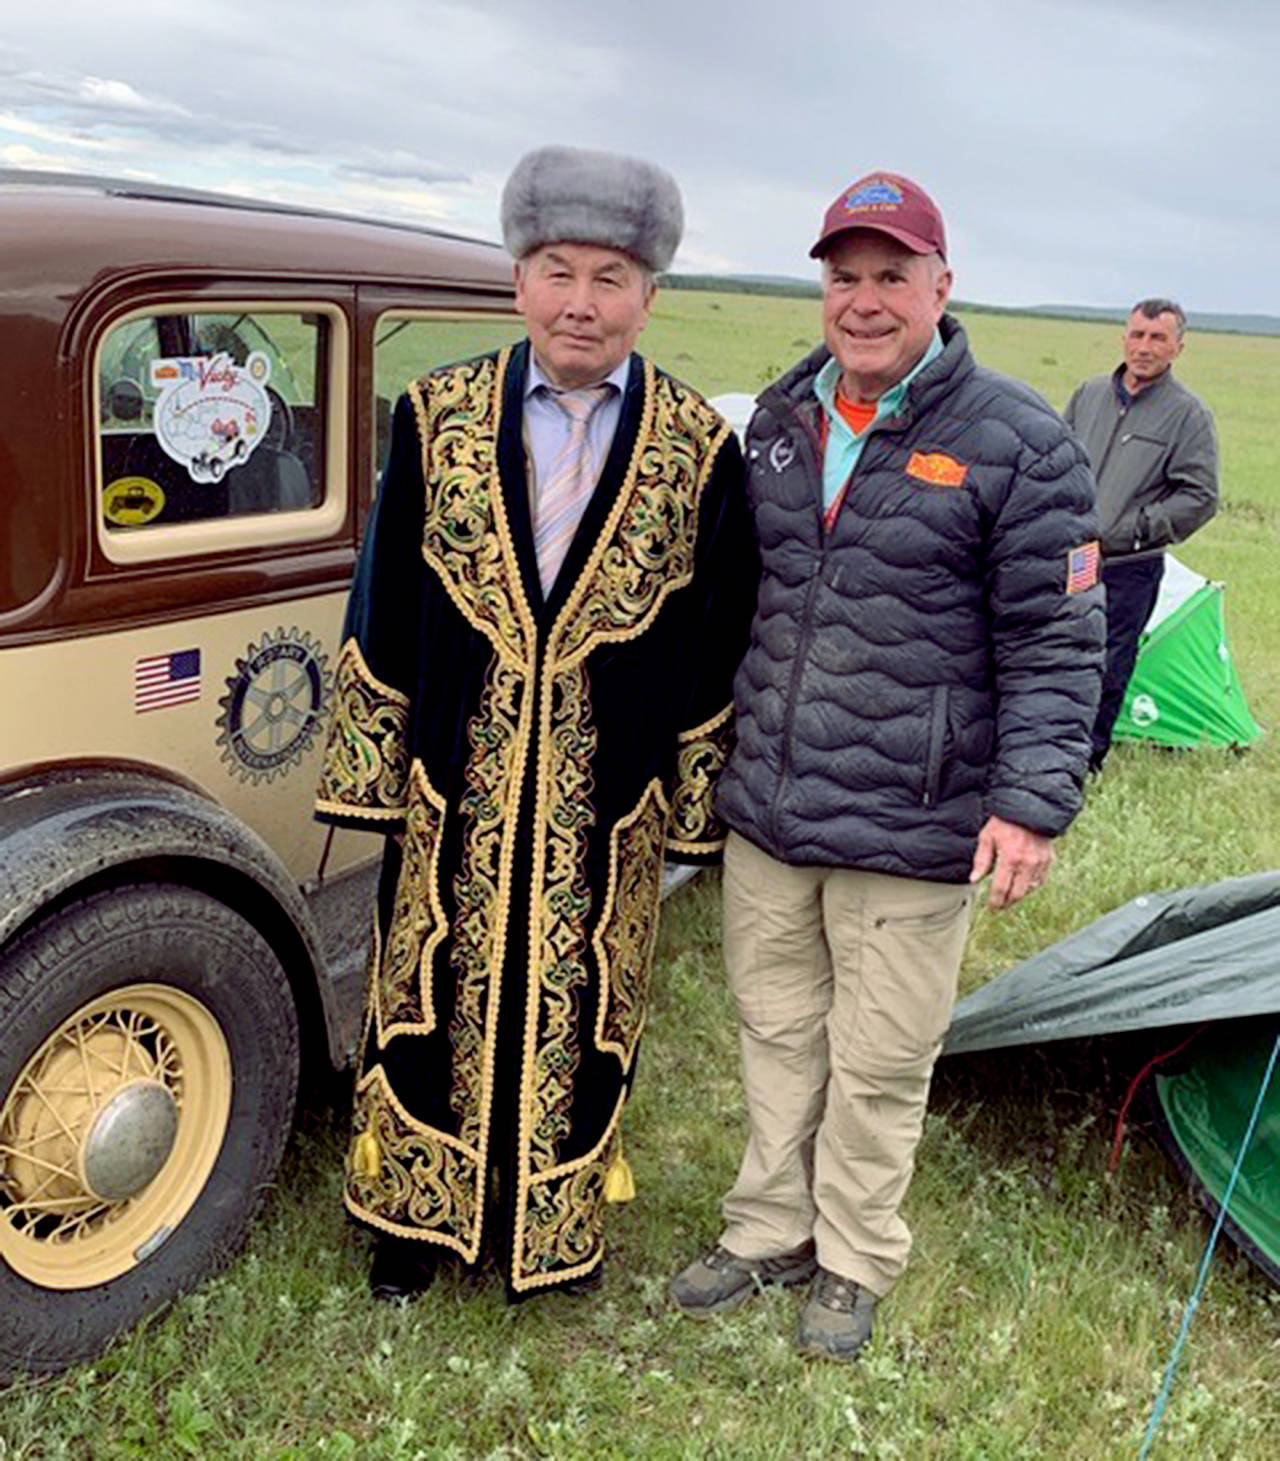 Lee Harmon poses with a Kazakh man in customary costume who was part of a welcoming committee at the Balkashino campsite in Kazakhstan. (Bill Ward)